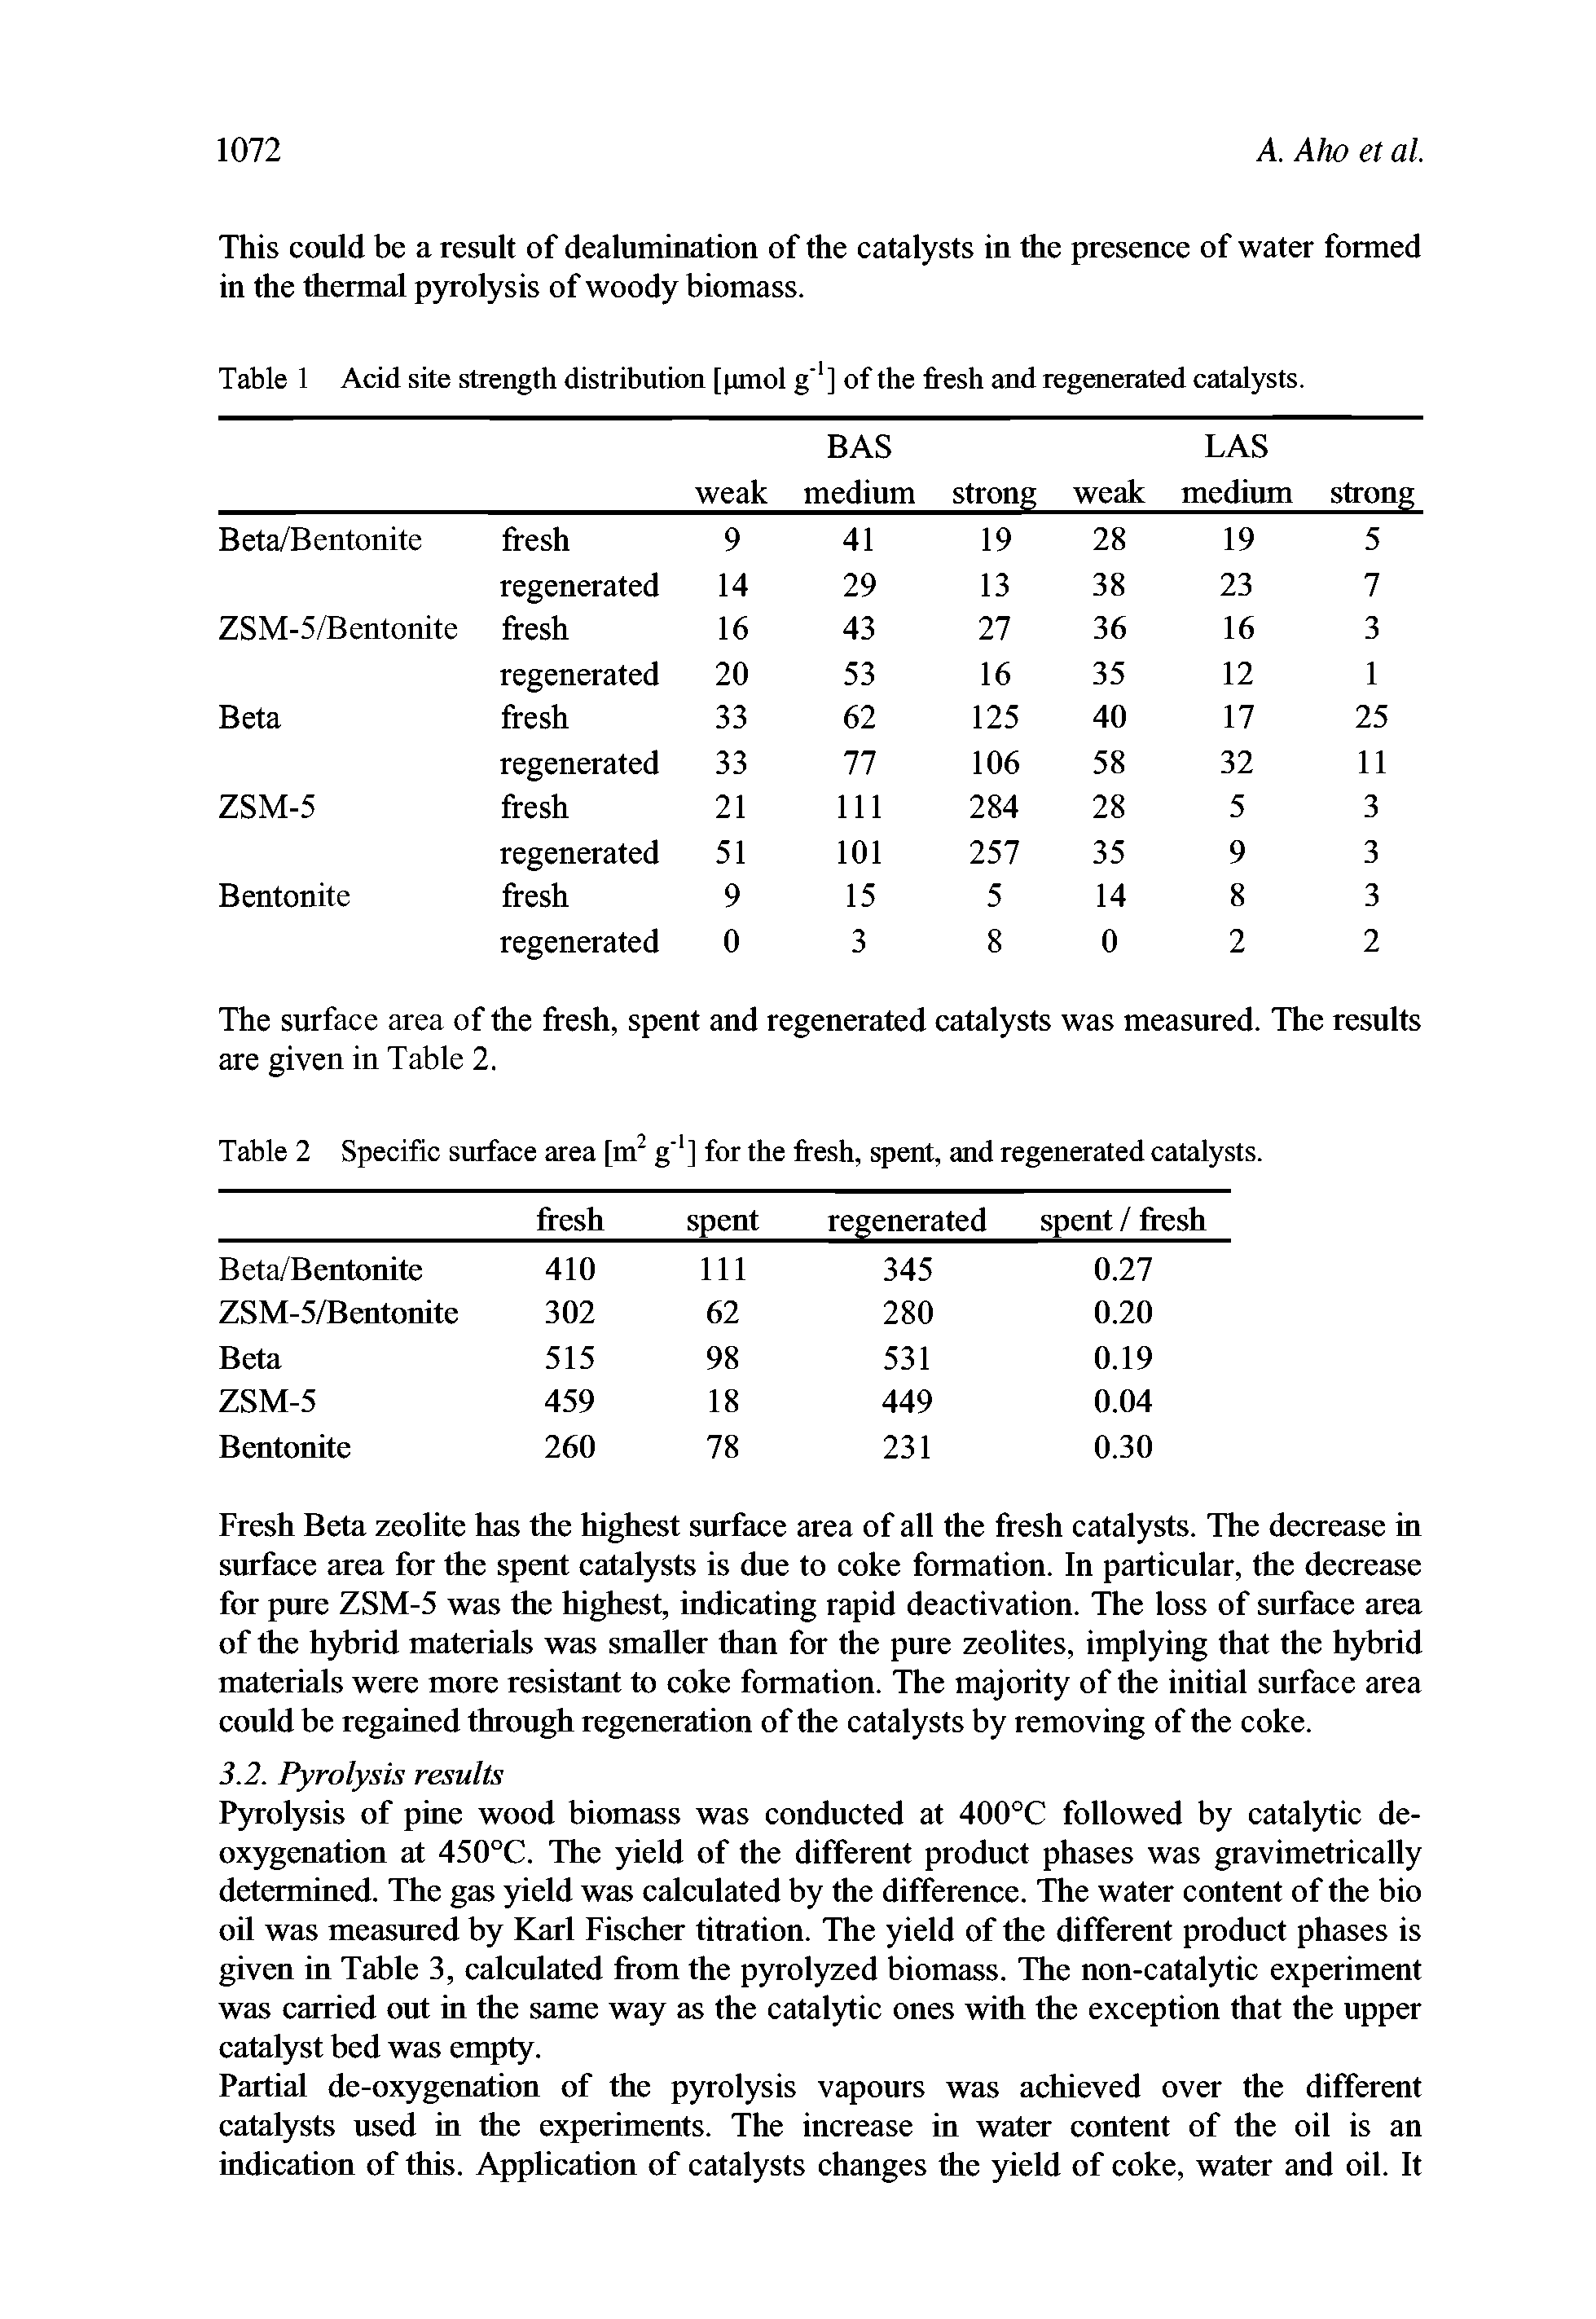 Table 1 Acid site strength distribution [pmol g 1] of the fresh and regenerated catalysts.